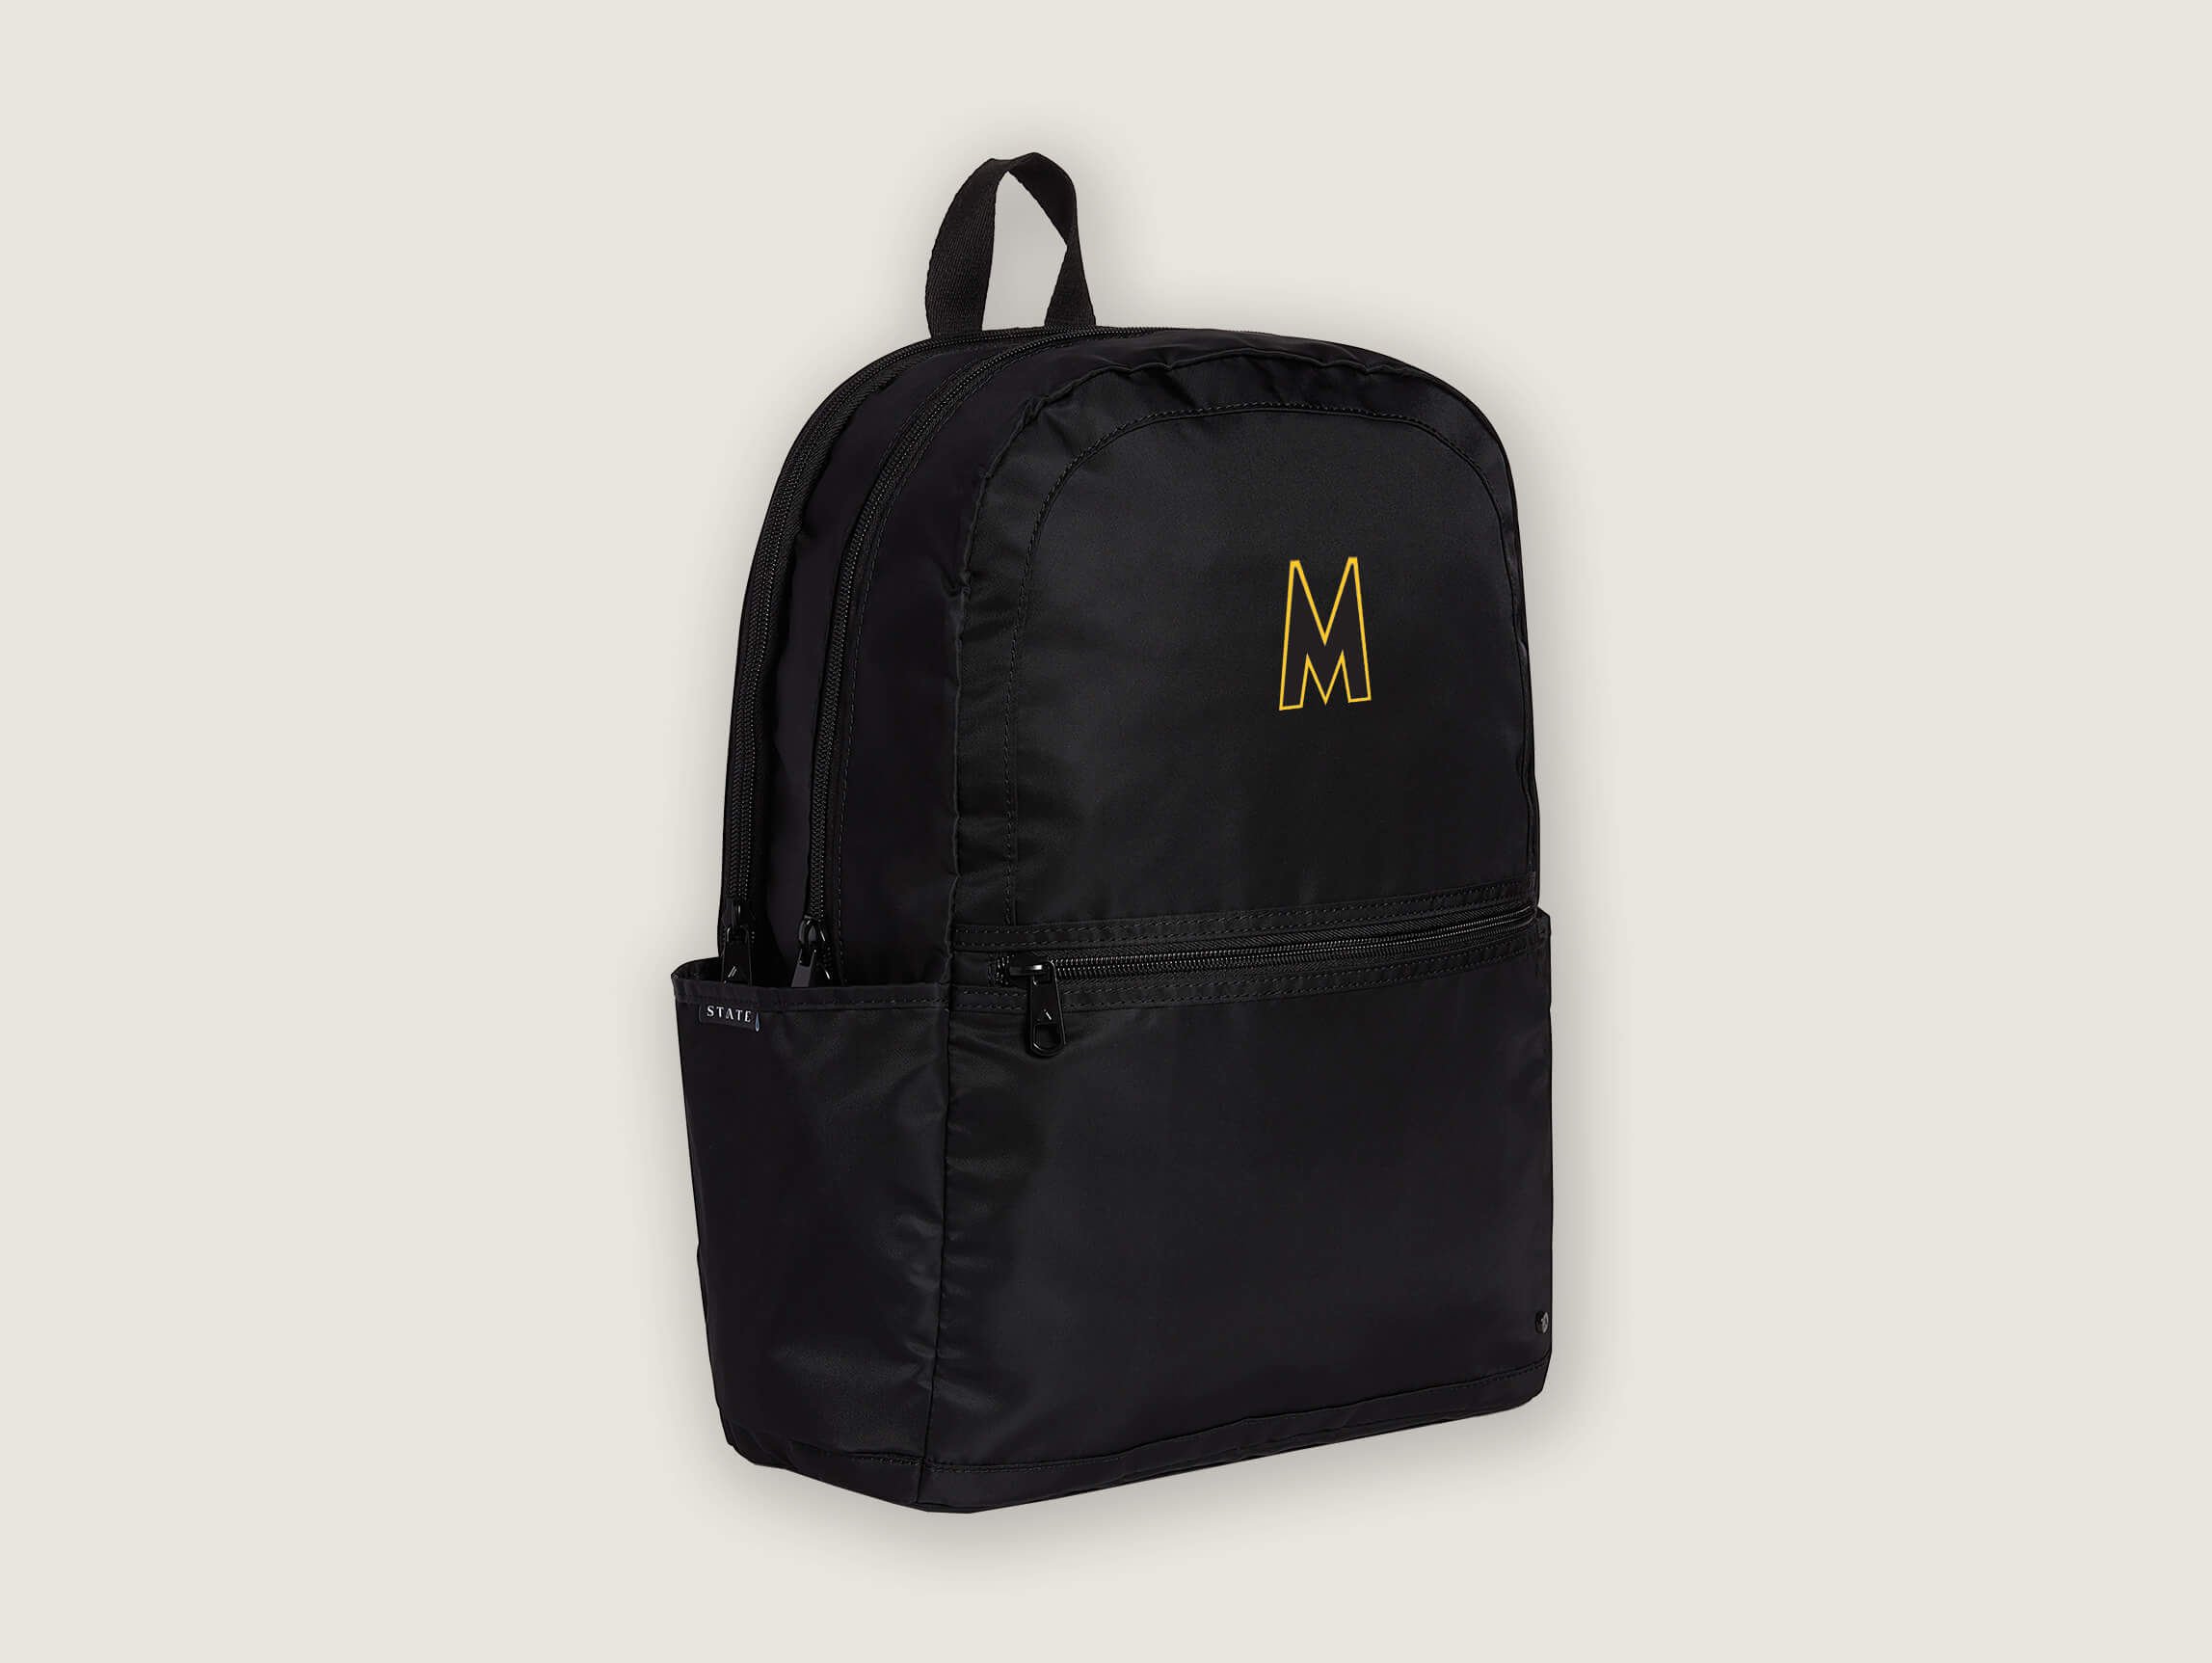 The MOSCOT Backpack